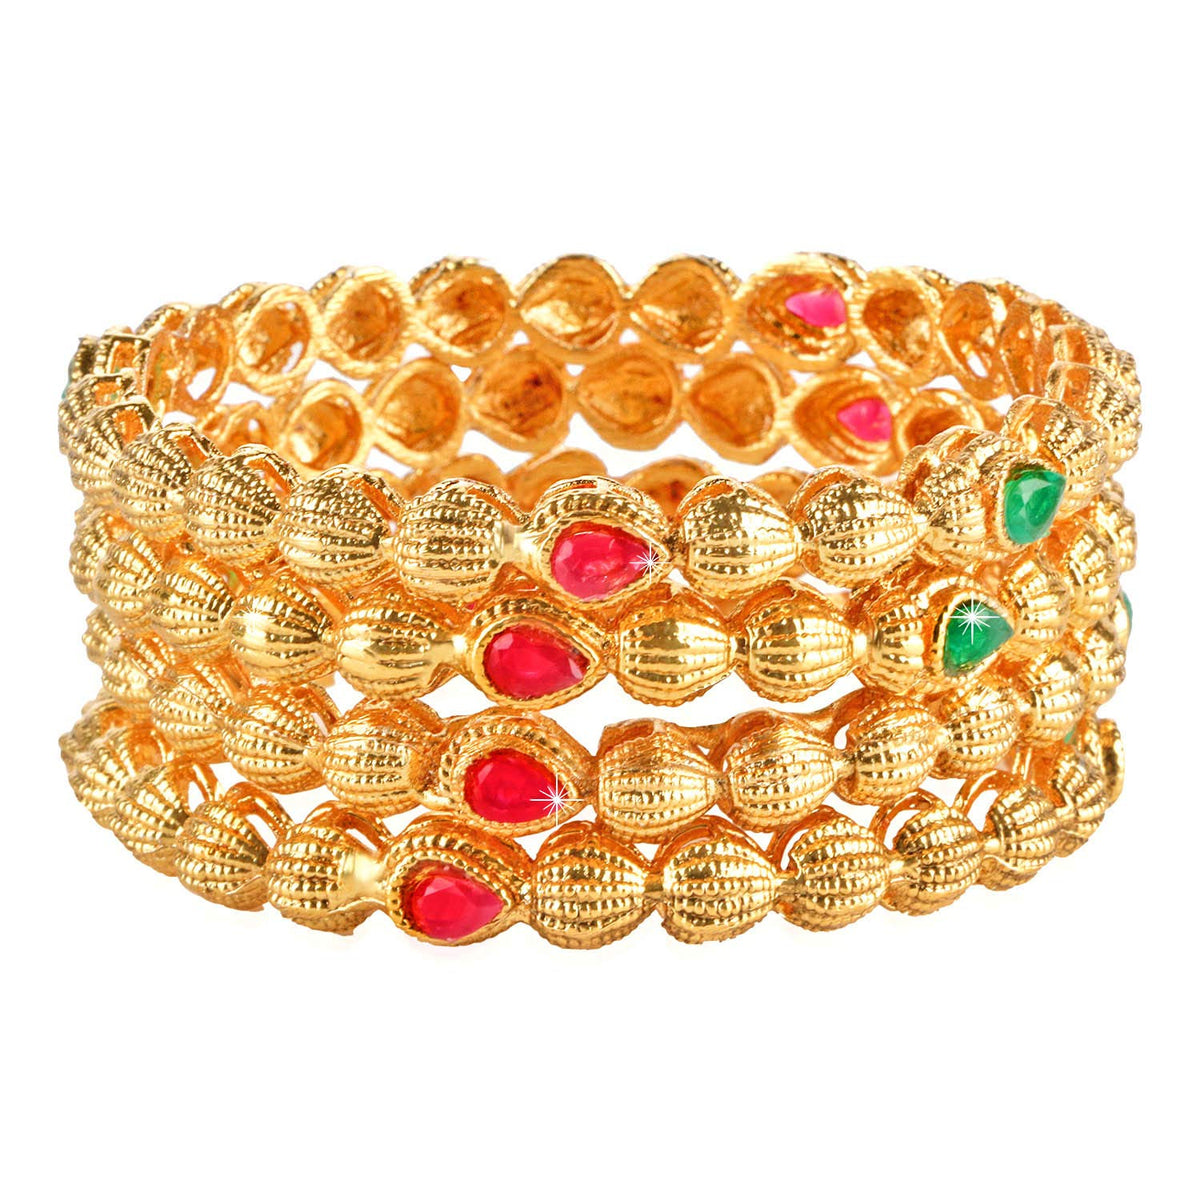 Yellow Chimes Elegant Latest Style Bangles Traditional Bangle Set for Women and Girls